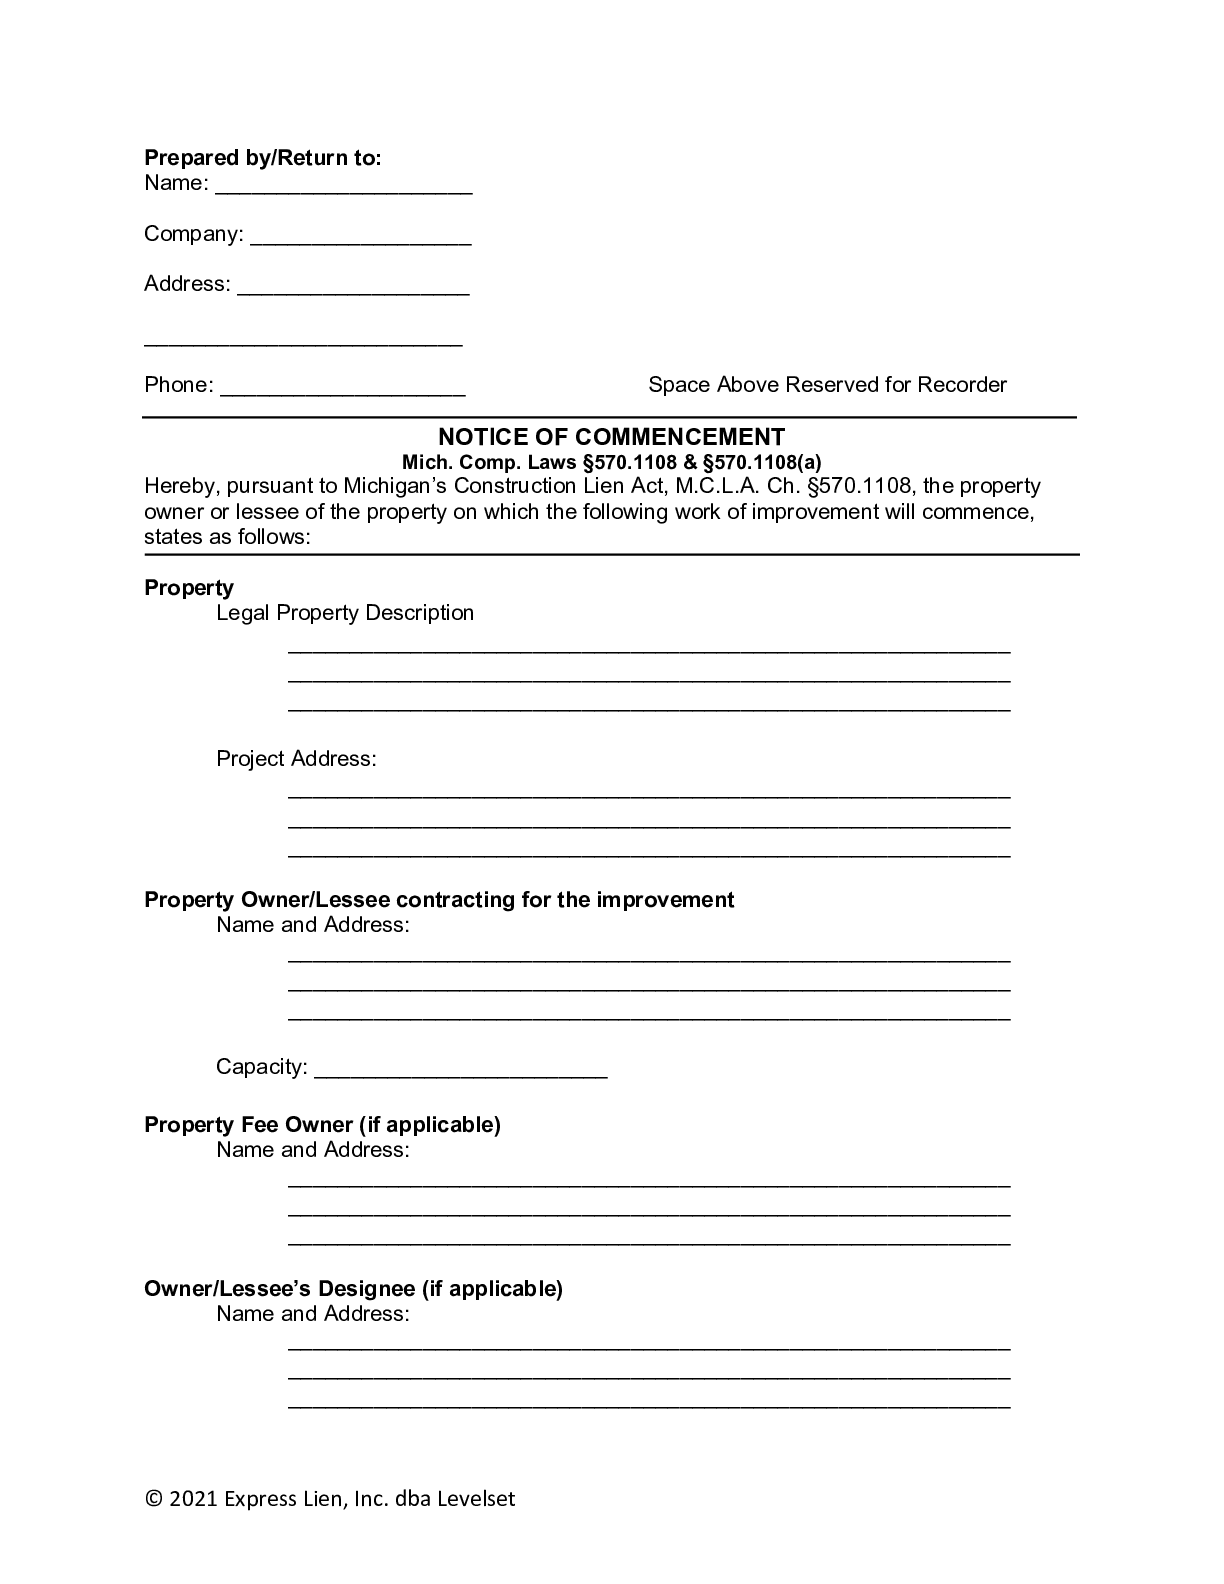 Michigan Notice of Commencement Form